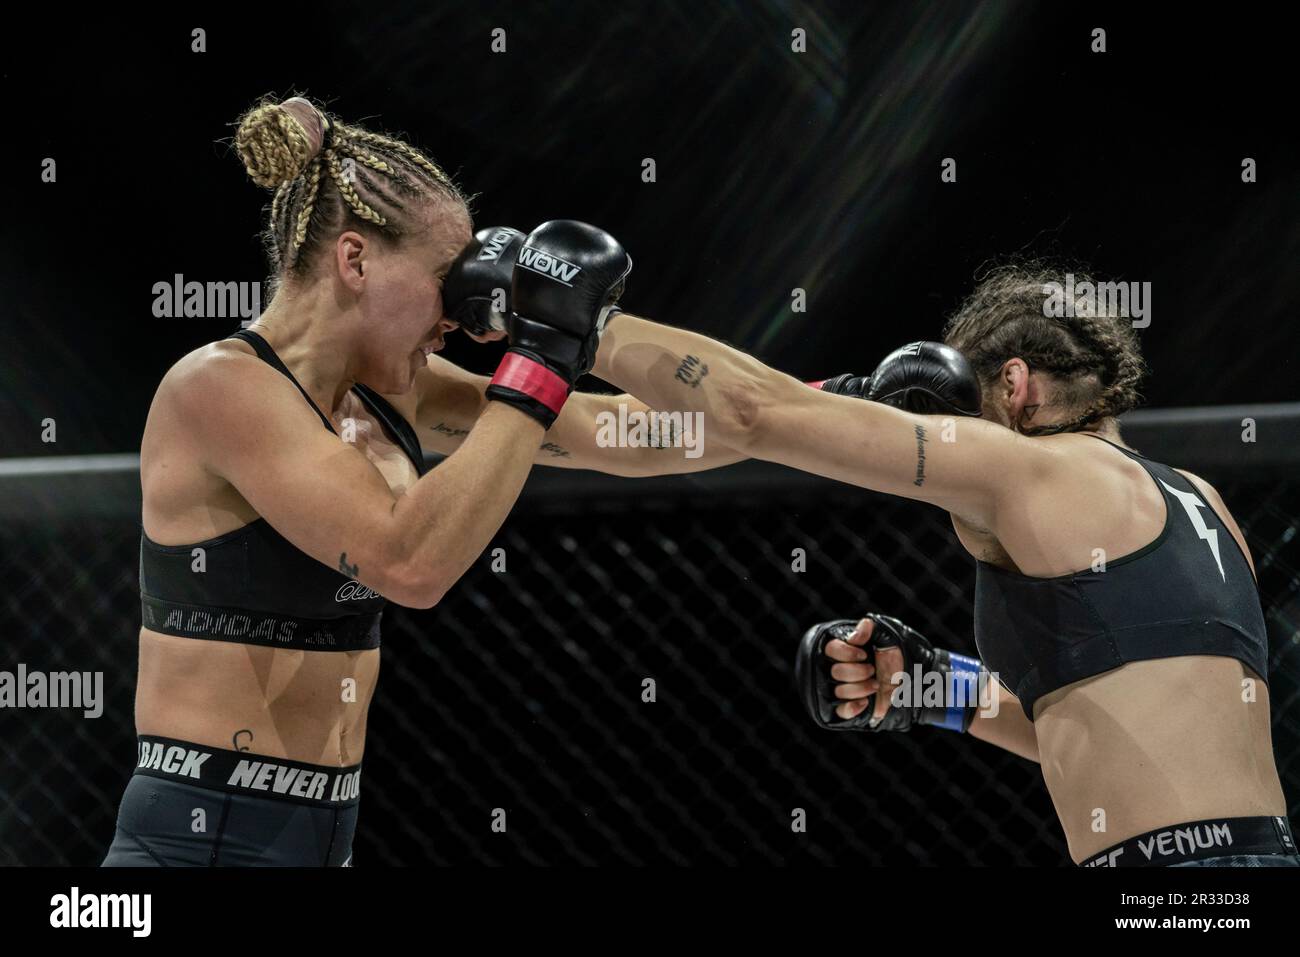 Madrid, Spain. 20th May, 2023. Chanel Forster and Mercedes Custodio fight during the Mixed Martial Arts competition 'WOW 9 : El Camino del Guerrero' at Palacio de Vistalegre Arena. (Photo by Guillermo Gutierrez/SOPA Image/Sipa USA) Credit: Sipa USA/Alamy Live News Stock Photo